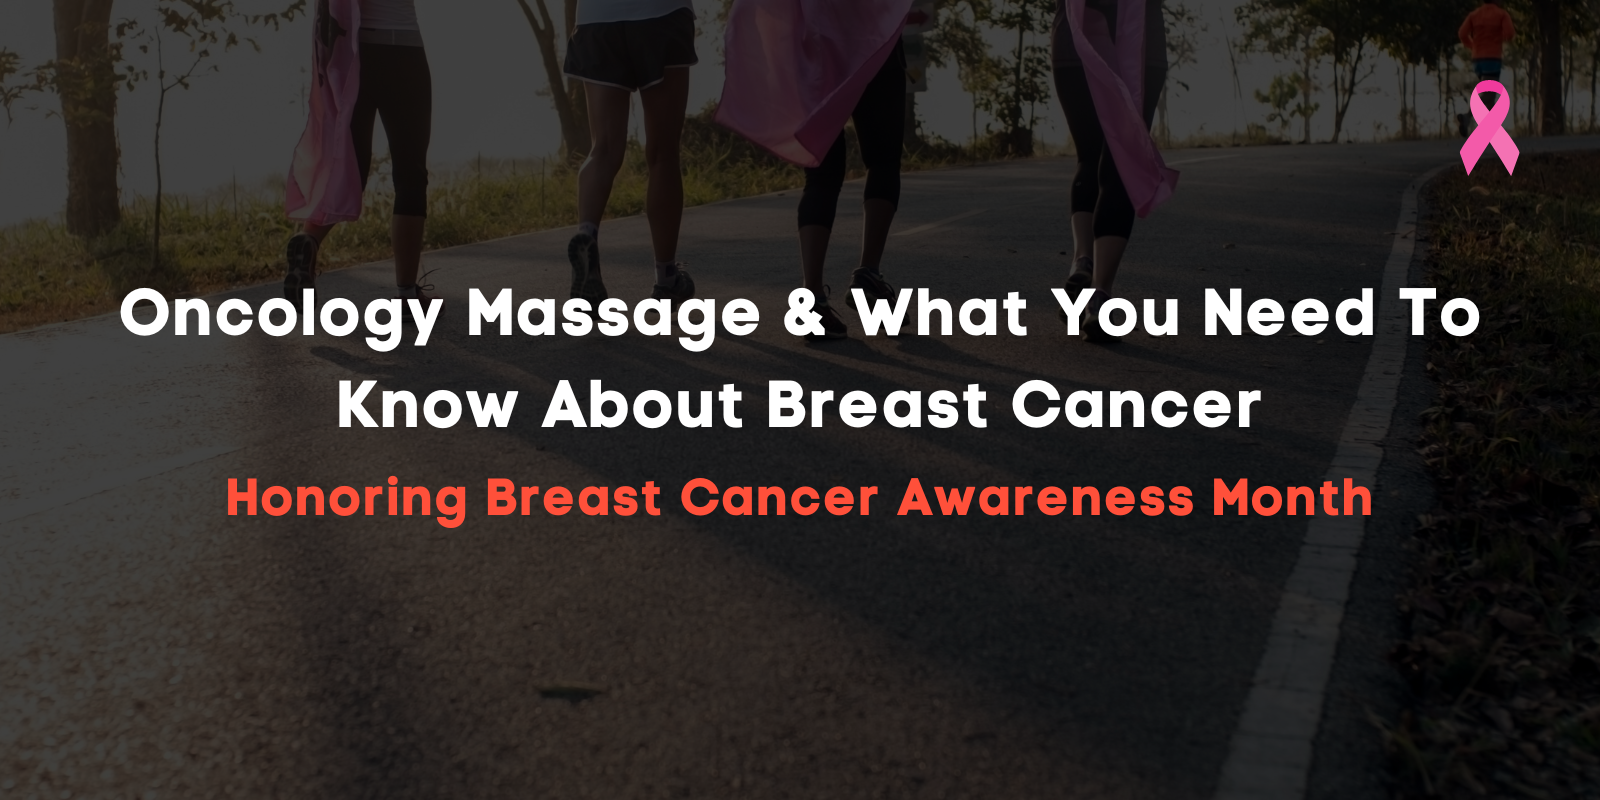 Oncology Massage: Breast Cancer Awareness Month | Elements Massage - Whitefish Bay